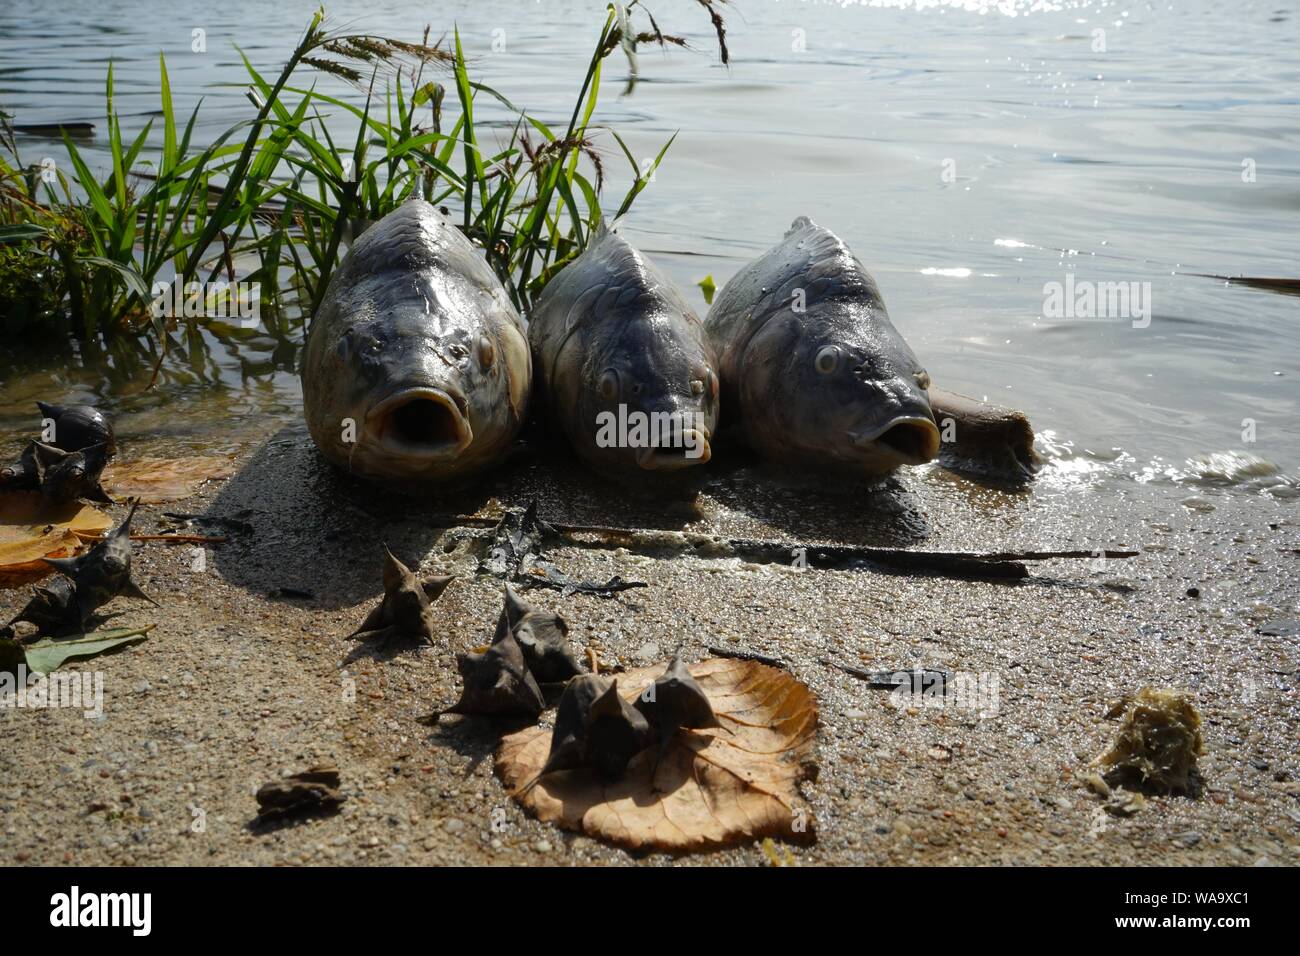 3 dead carps n the shore of the pond. Fish die as a result of extreme heat and deoxygenation of water, or from the dangerous Koi herpes virus 3. Stock Photo